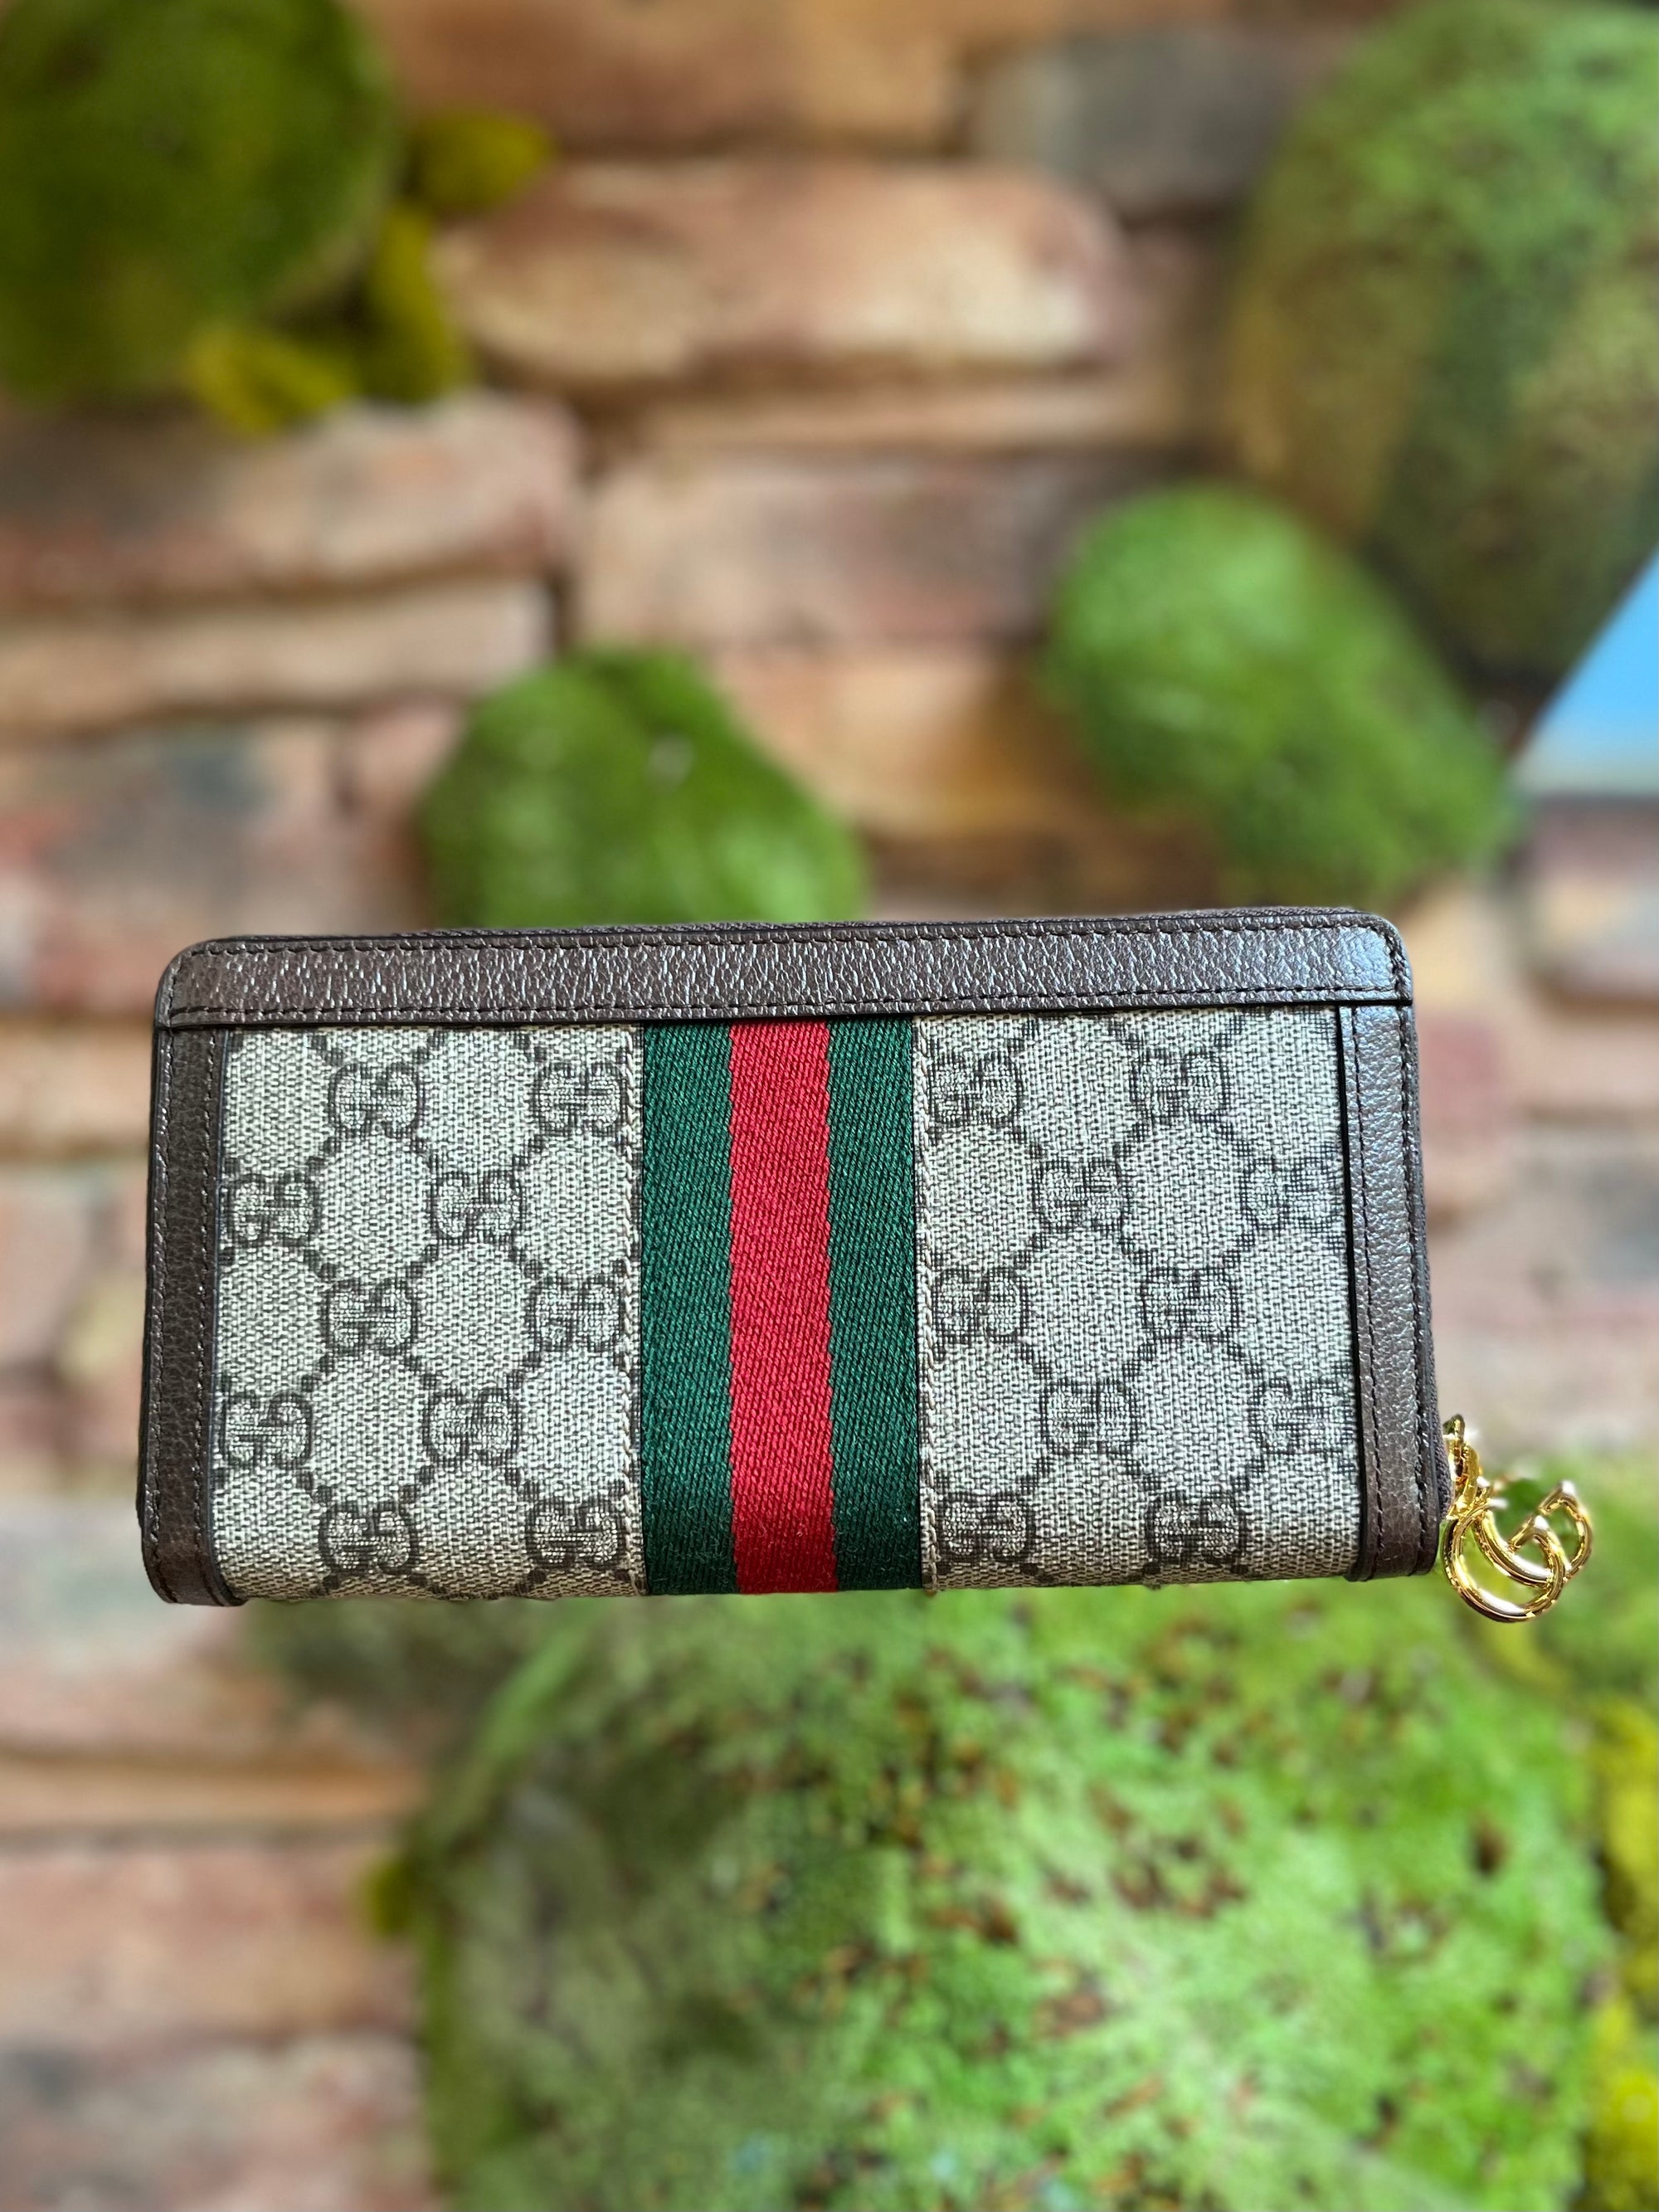 Authentic Gucci Bags, Shoes and Accessories - The Purse Ladies